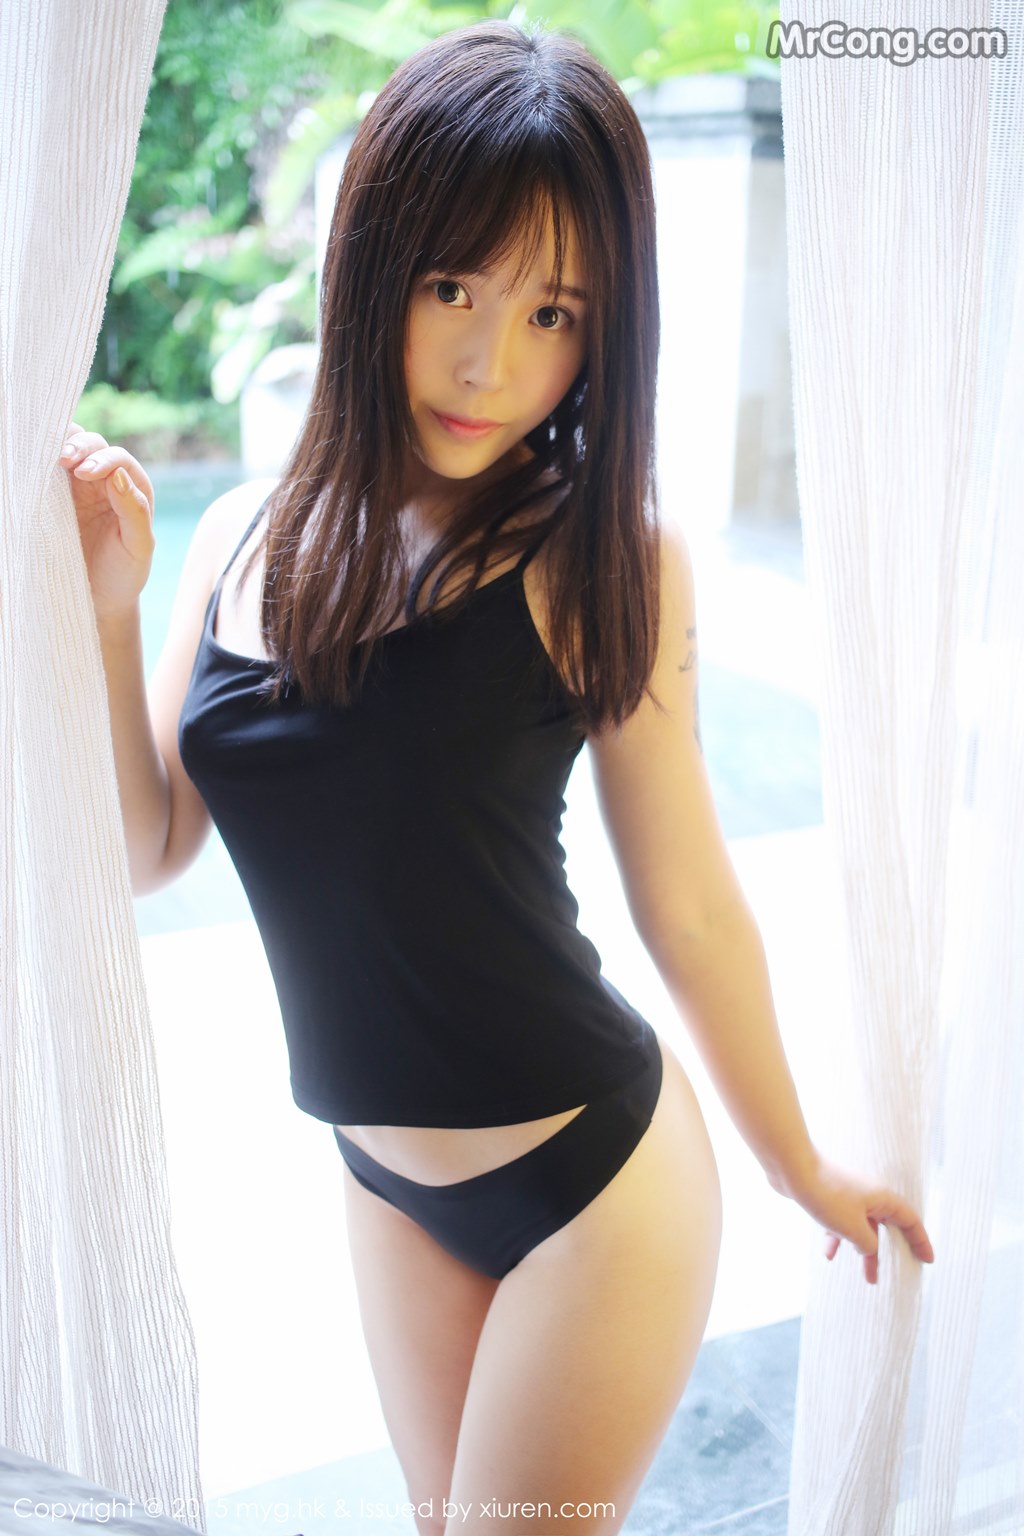 MyGirl Vol.173: Model Evelyn (艾莉) (94 pictures) photo 3-9